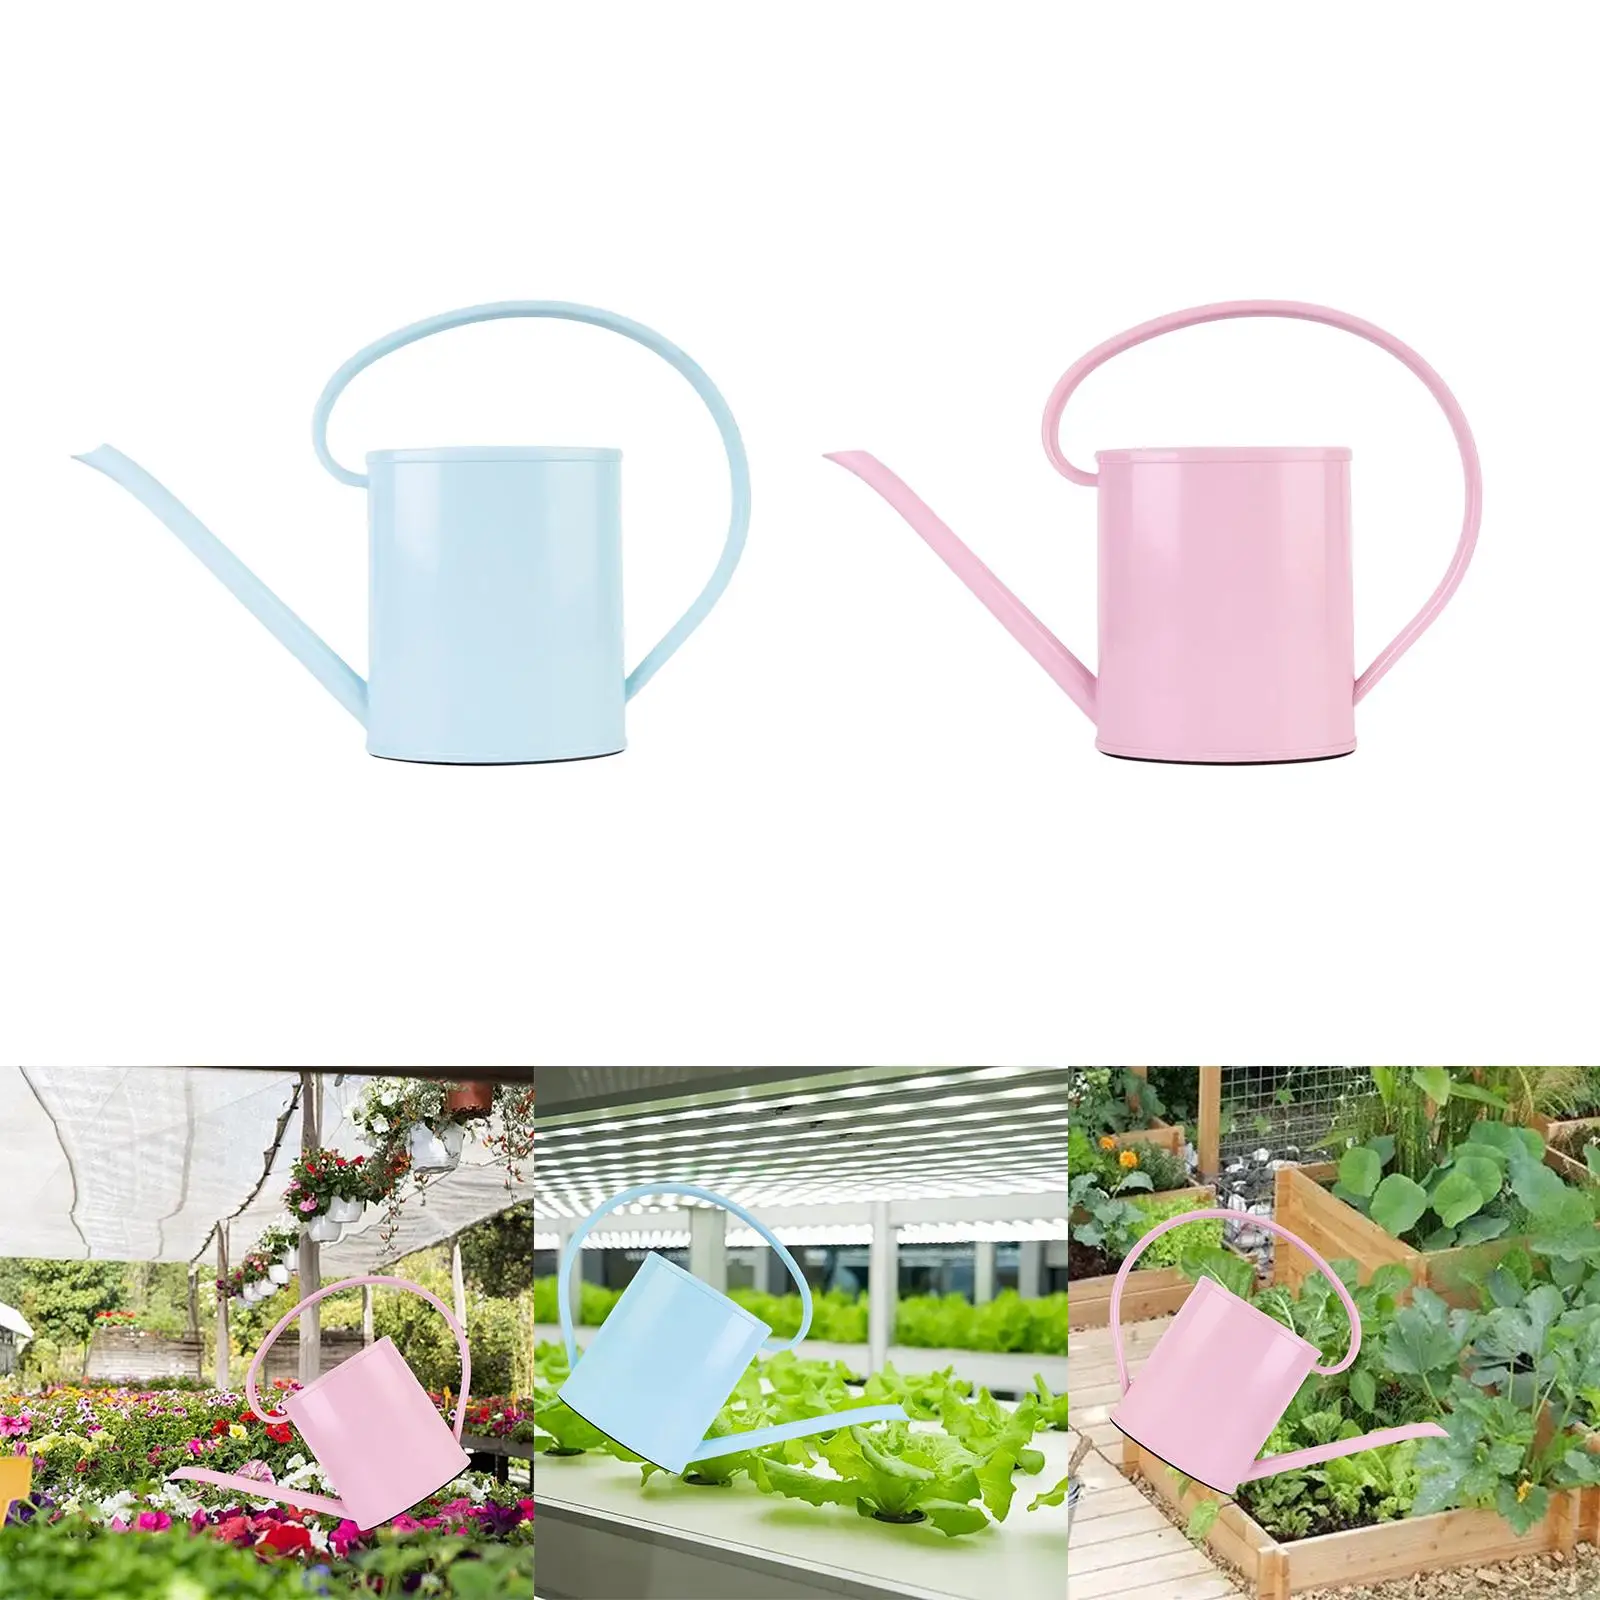 1.2L Watering Kettle Pot Long Nozzle 21cm Durable for Spraying and Watering Indoor and Outdoor with Curved Handle Sturdy Modern